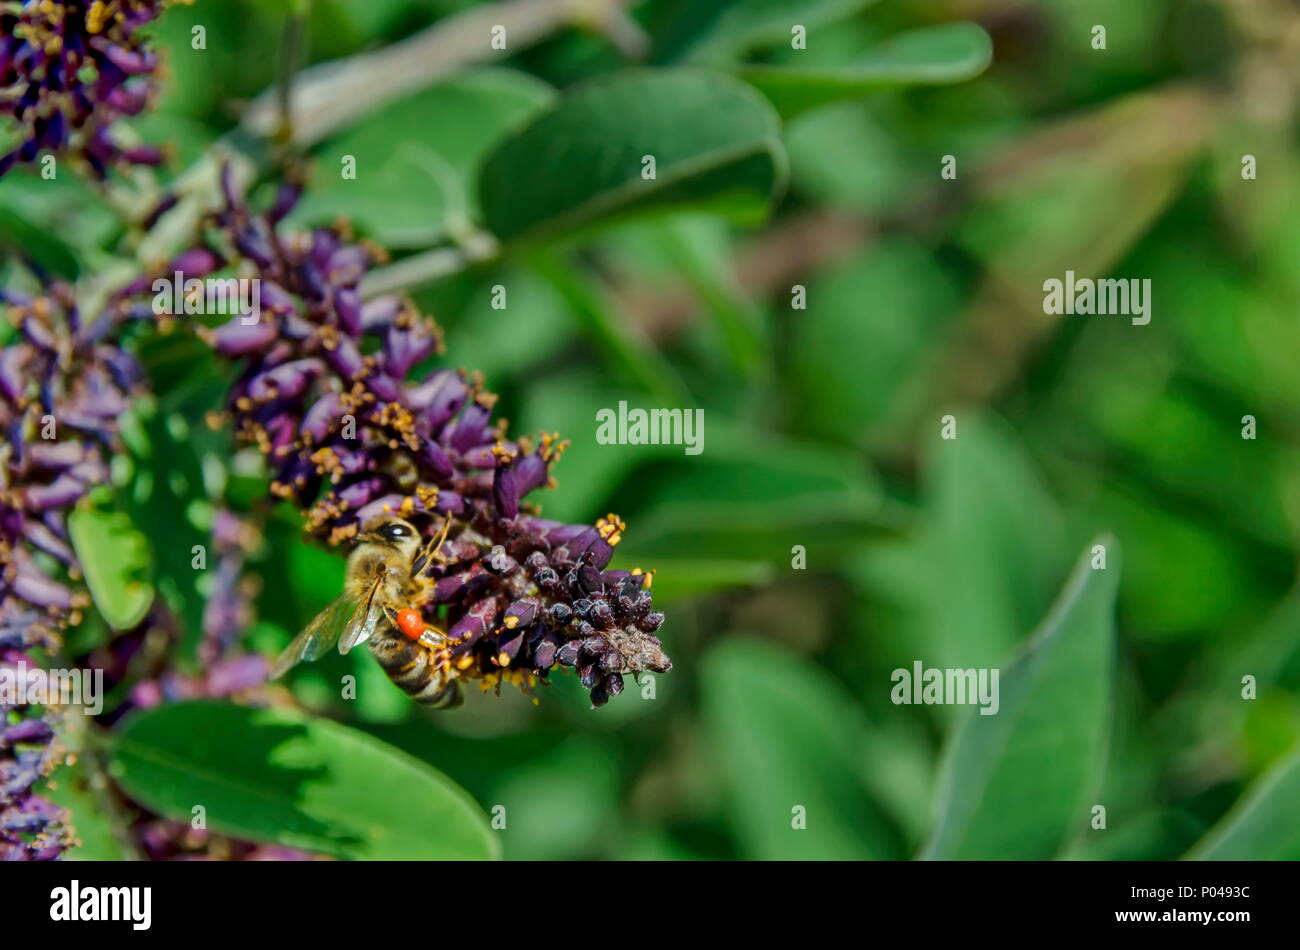 Macro close up of honey bee collecting pollen from purple flower, Sofia, Bulgaria Stock Photo